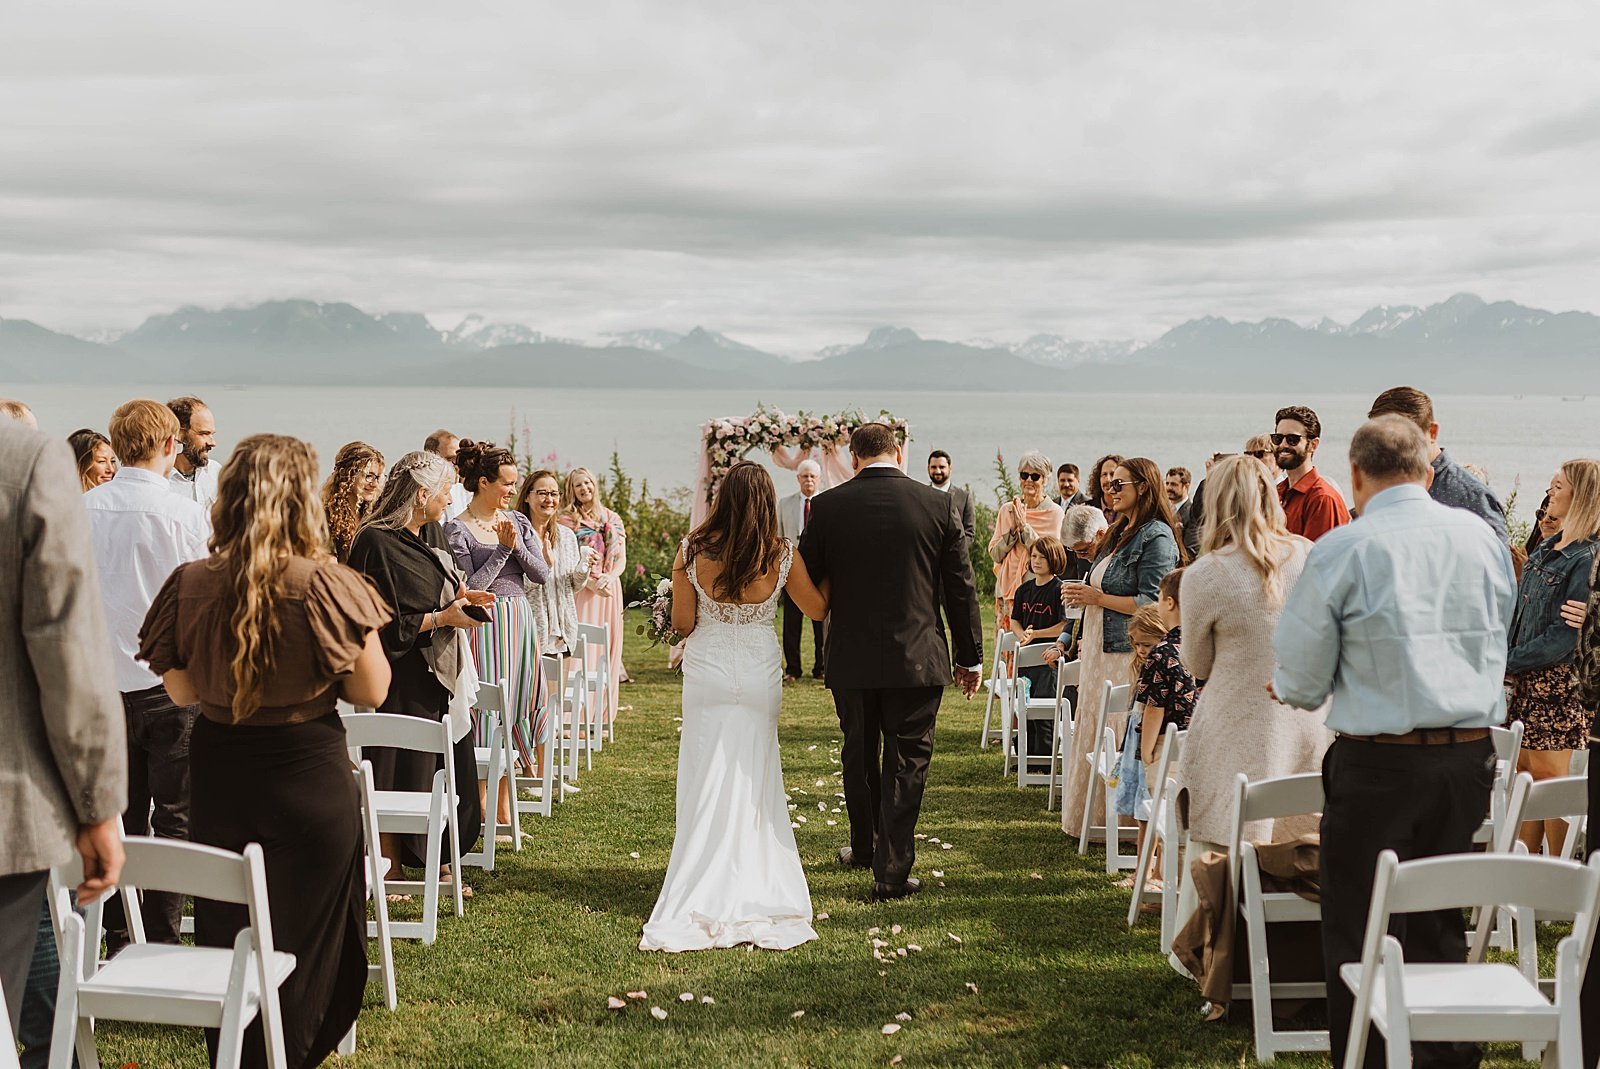  Bride walking down the aisle at her outdoor Summer Alaska ceremony 